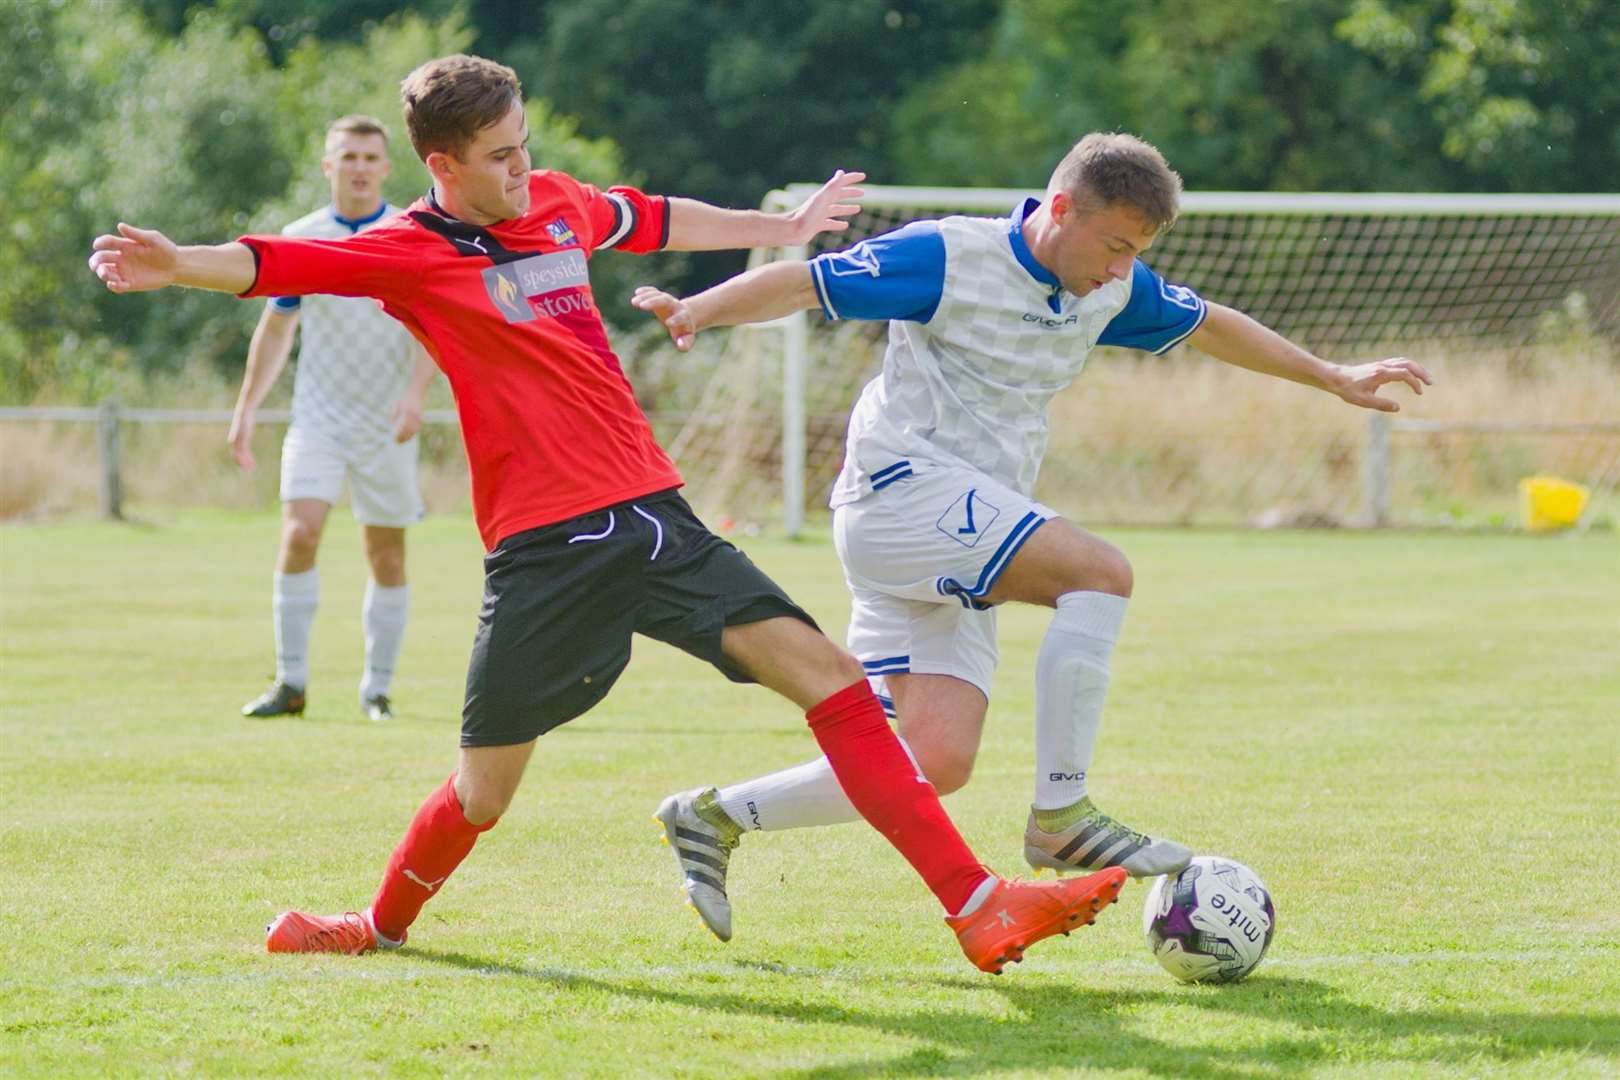 Greig Donald (left) scored a stunning volley for Aberlour in their 5-1 win against Craigellachie. Photo: Daniel Forsyth